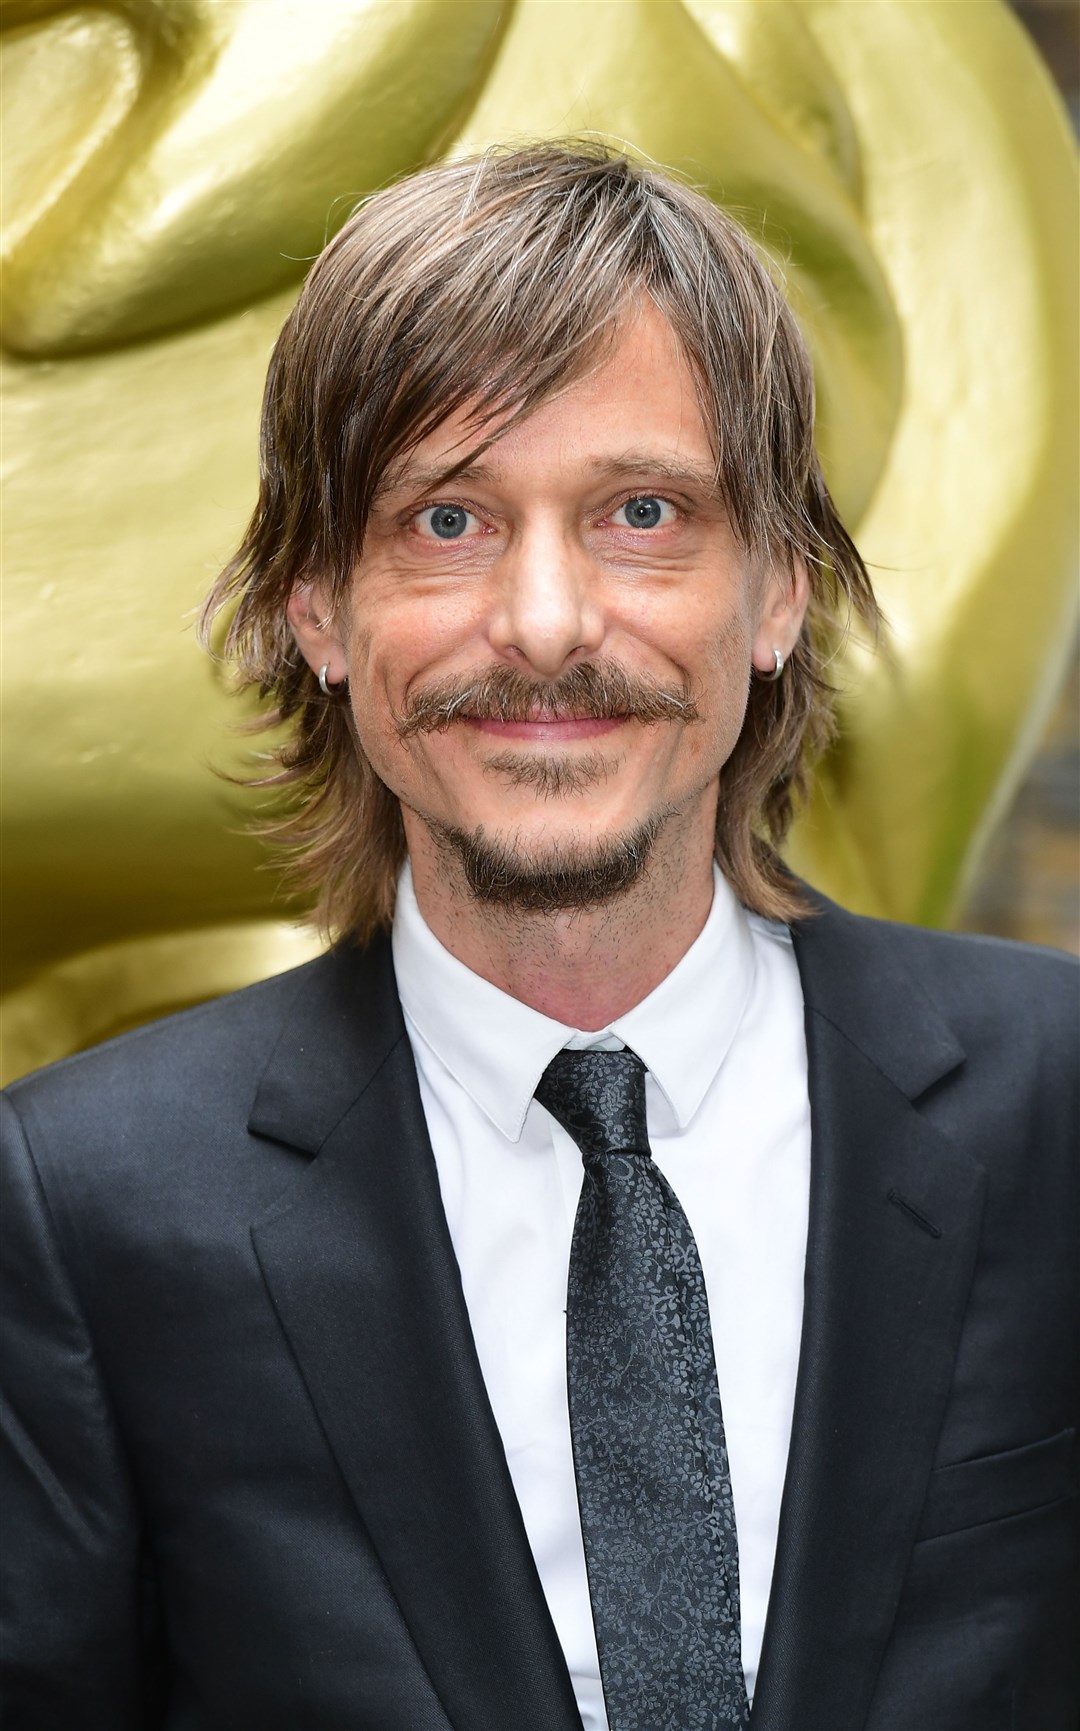 Mackenzie Crook has appealed for any information about his missing sister-in-law (PA)